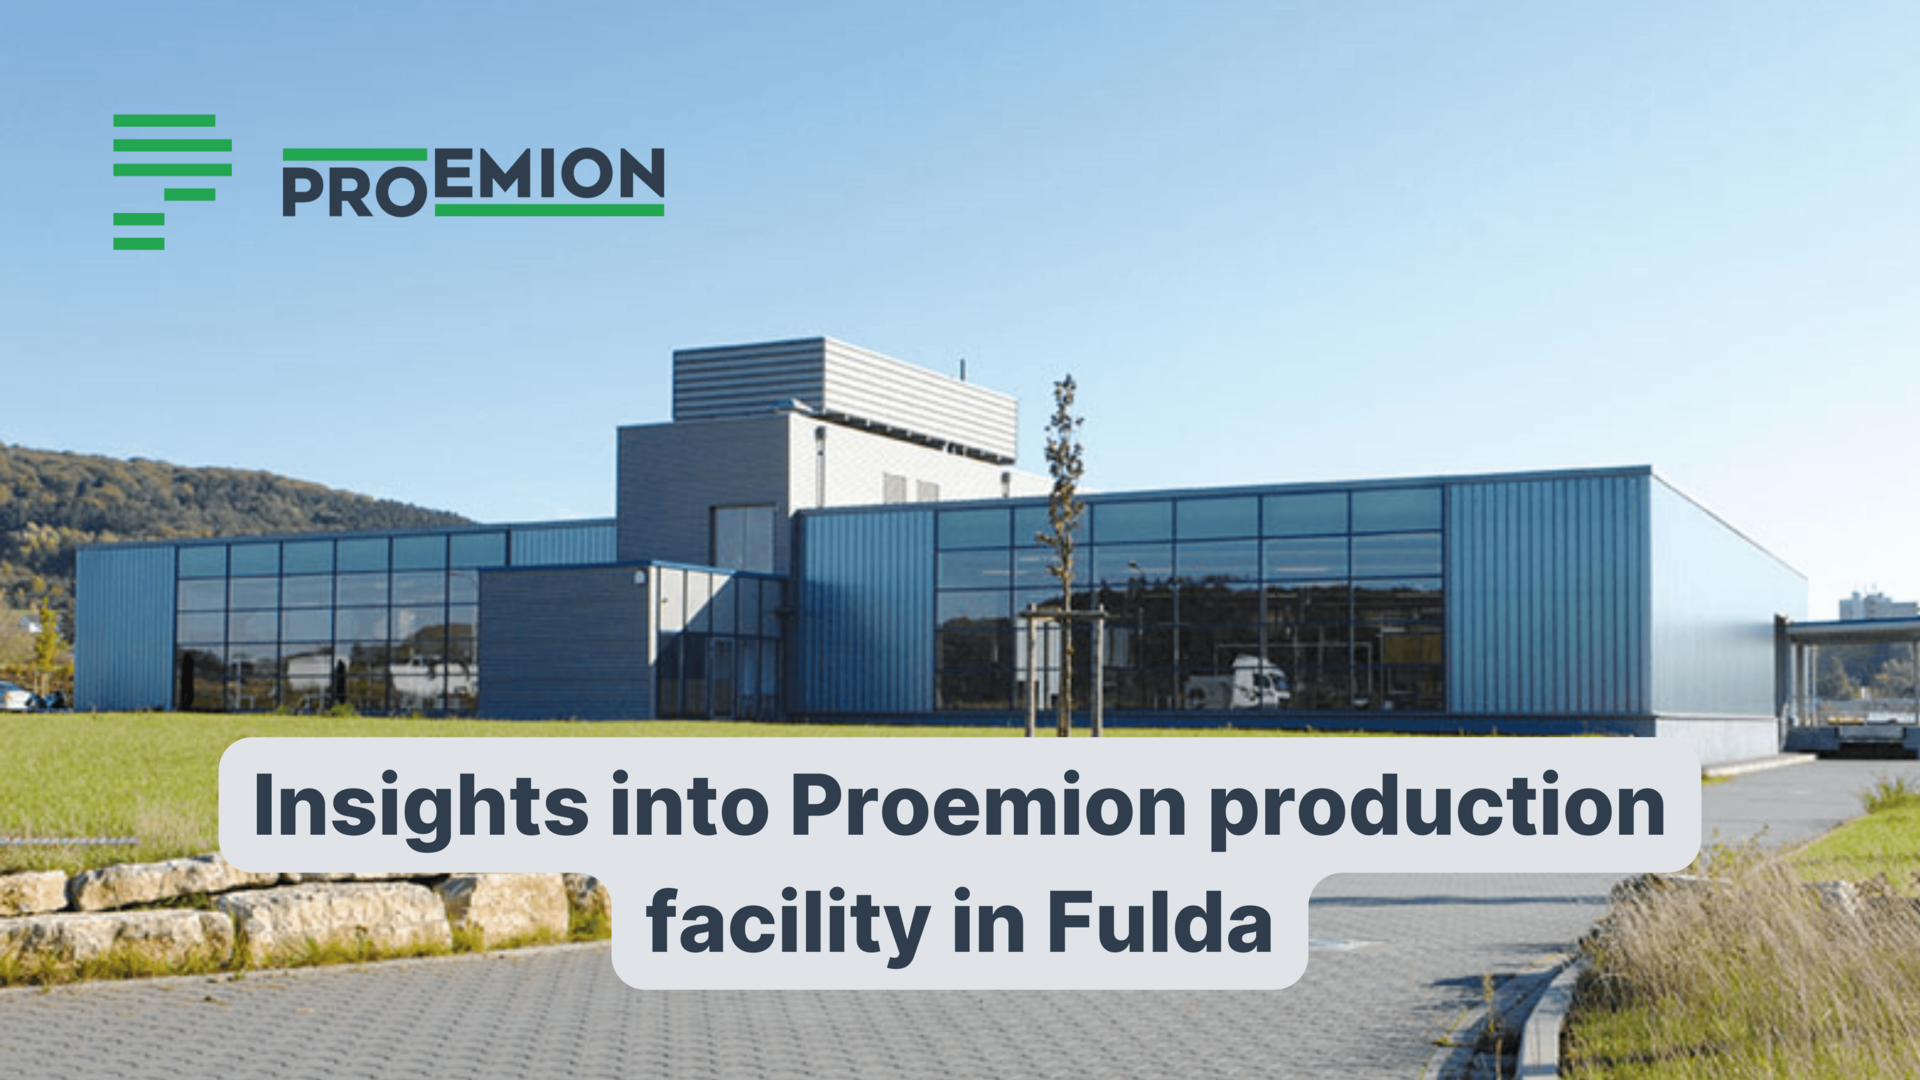 Insights into the Proemion production facility in Fulda